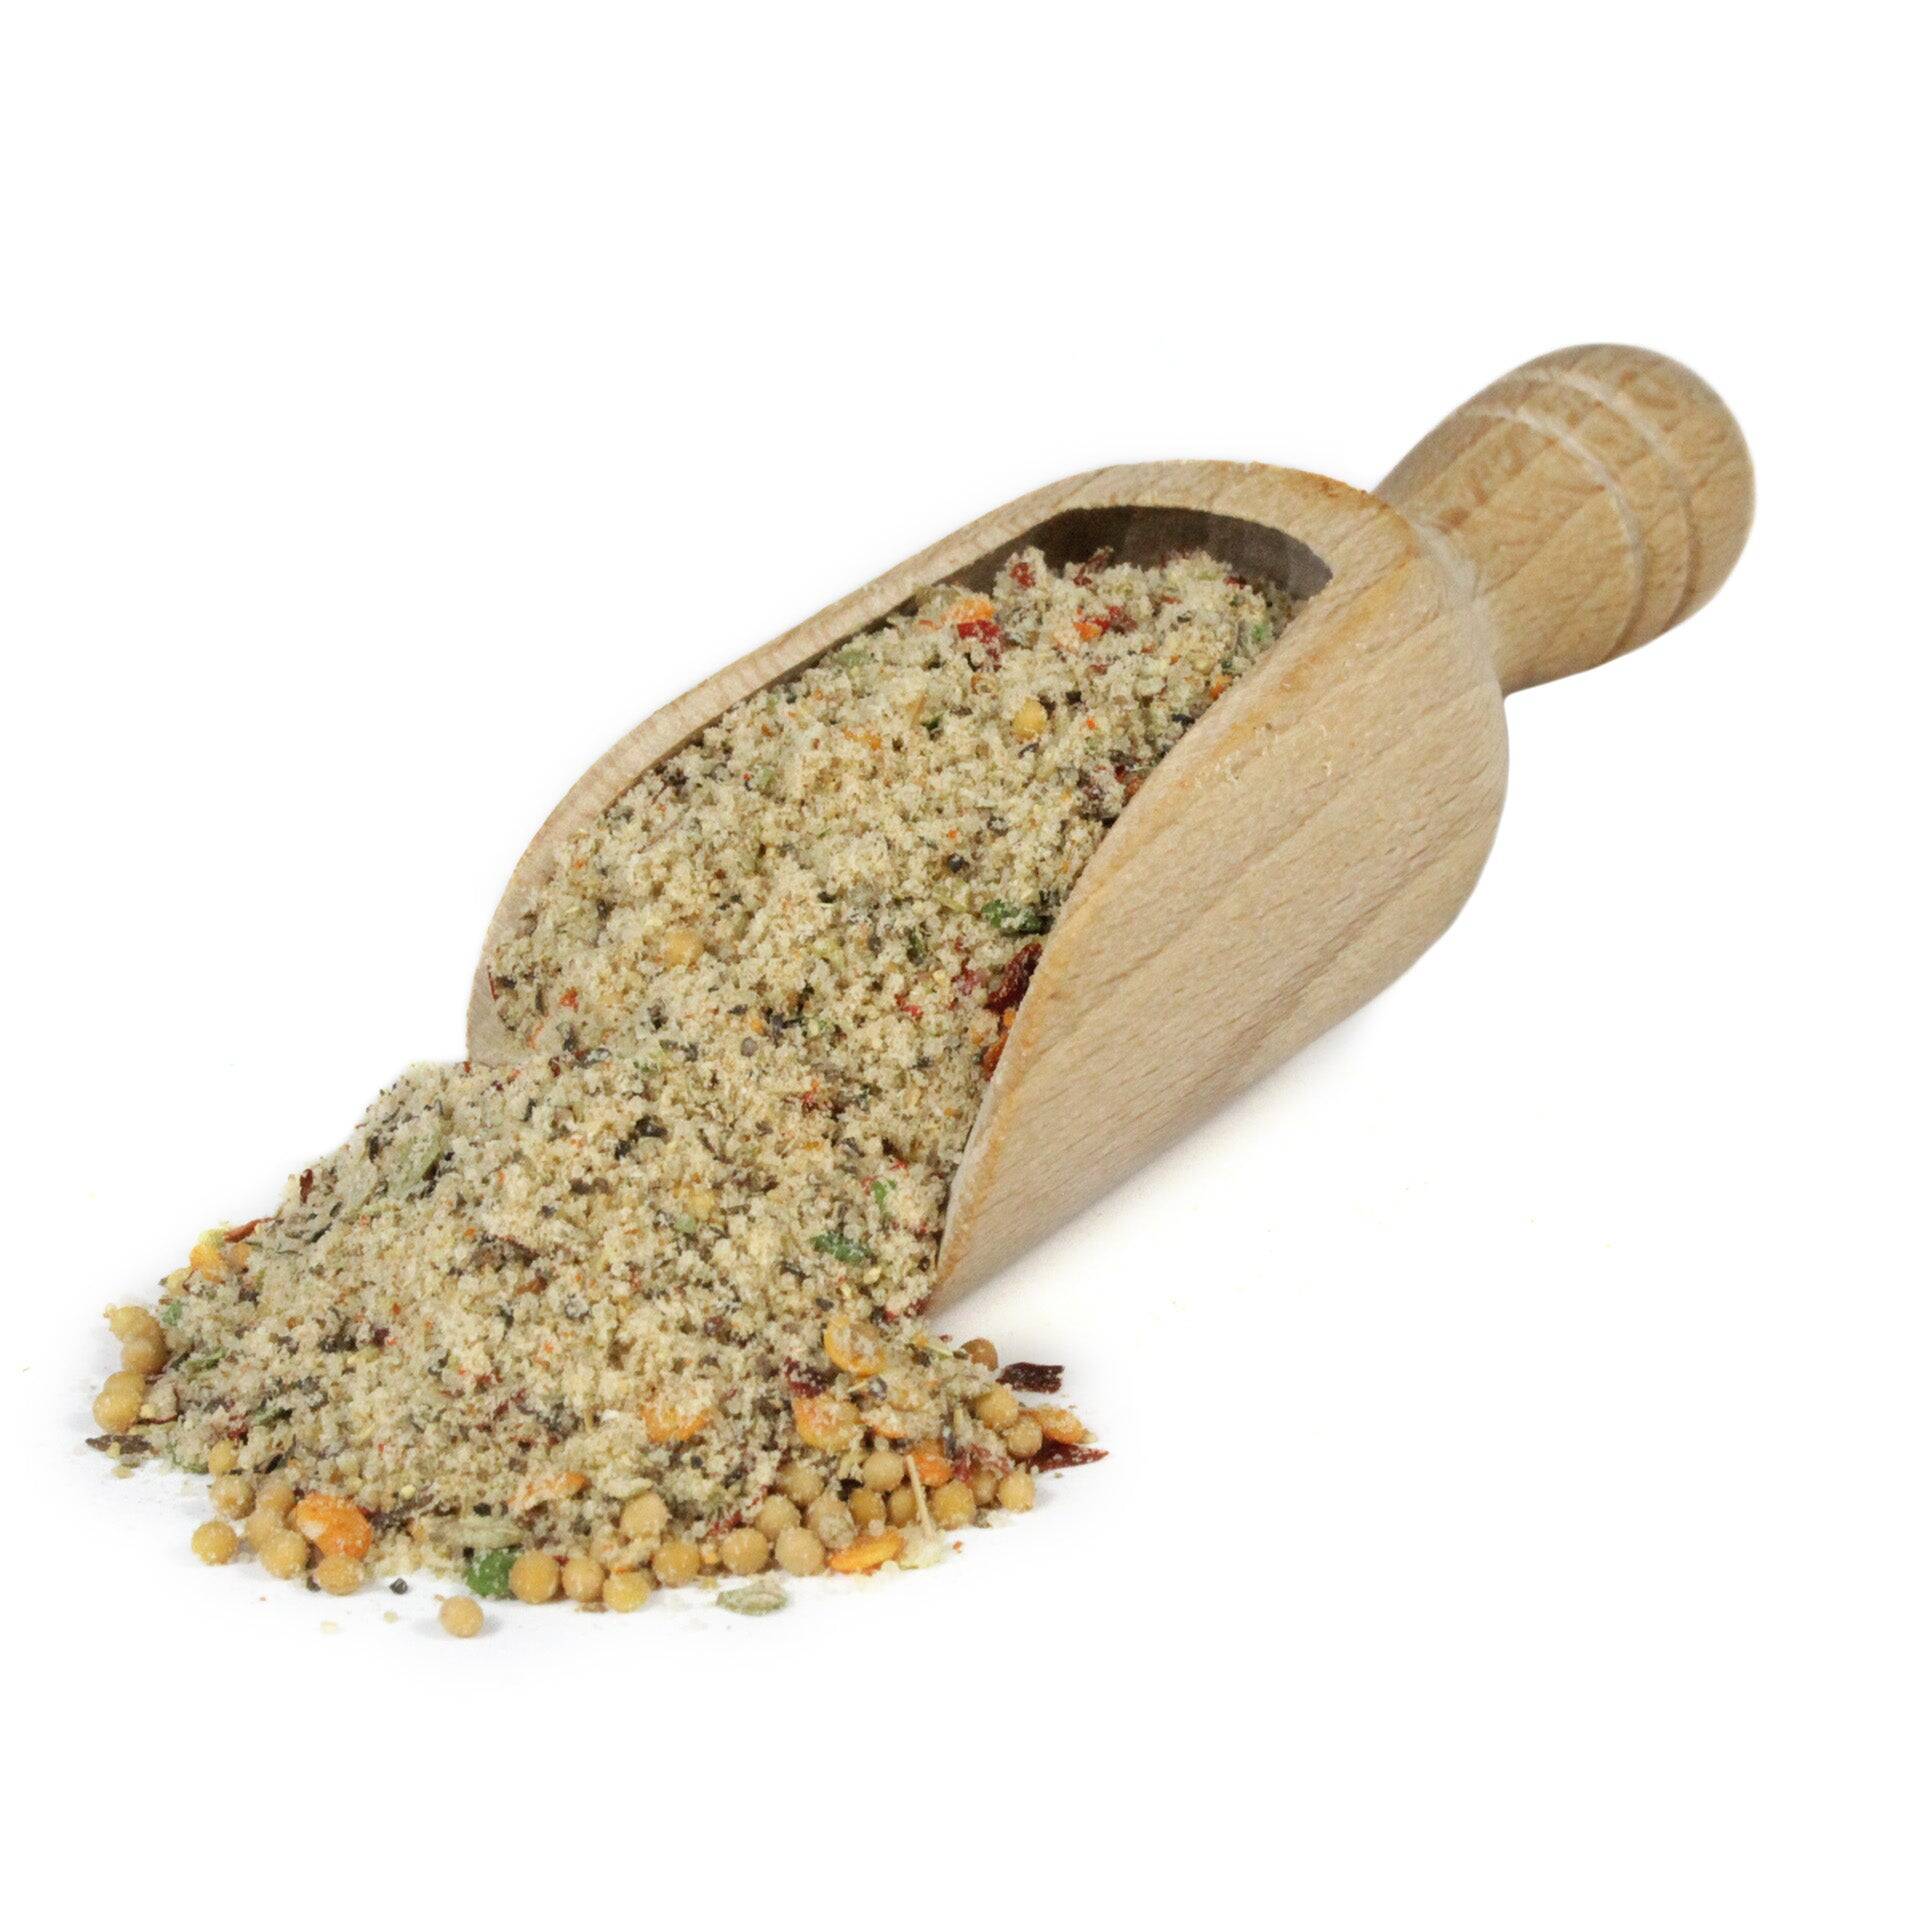 Poultry Seasoning - Red Stick Spice Company